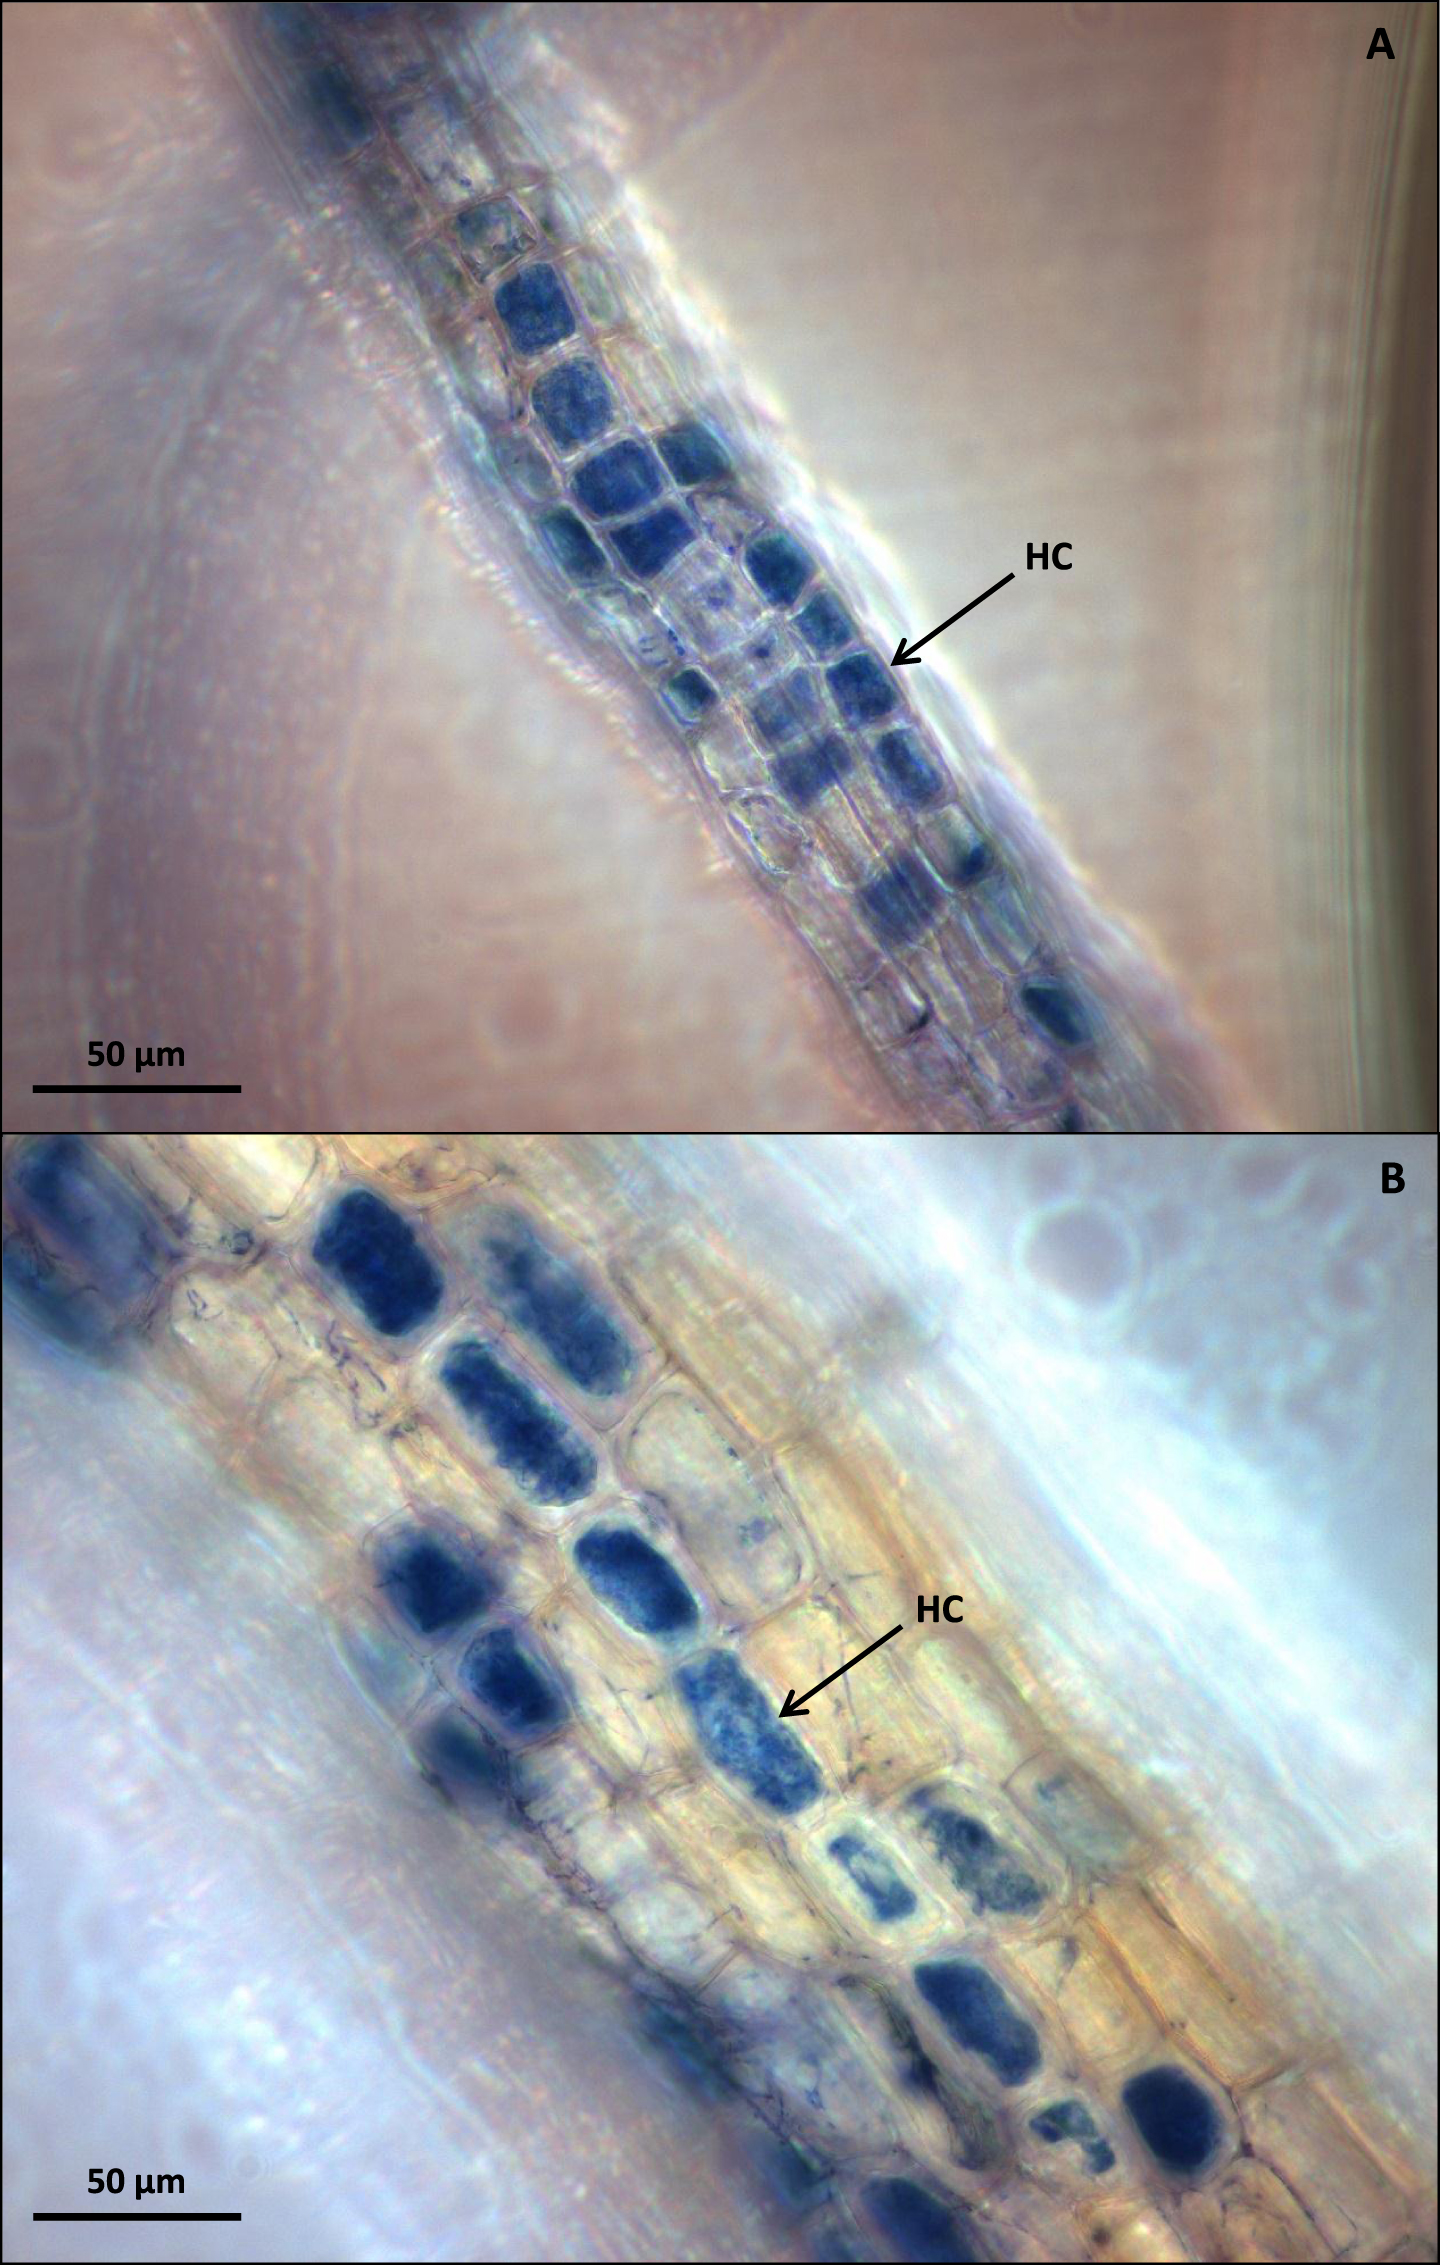 (A) Mycorrhizal V. myrtillus roots after freezing at –20 °C and staining with Trypan Blue and displaying intracellular hyphal coiling (HC). (B) Mycorrhizal V. vitis-idaea roots after freezing at –20 °C and staining with Trypan Blue and displaying intracellular hyphal coiling (HC). Bar = 50μm.